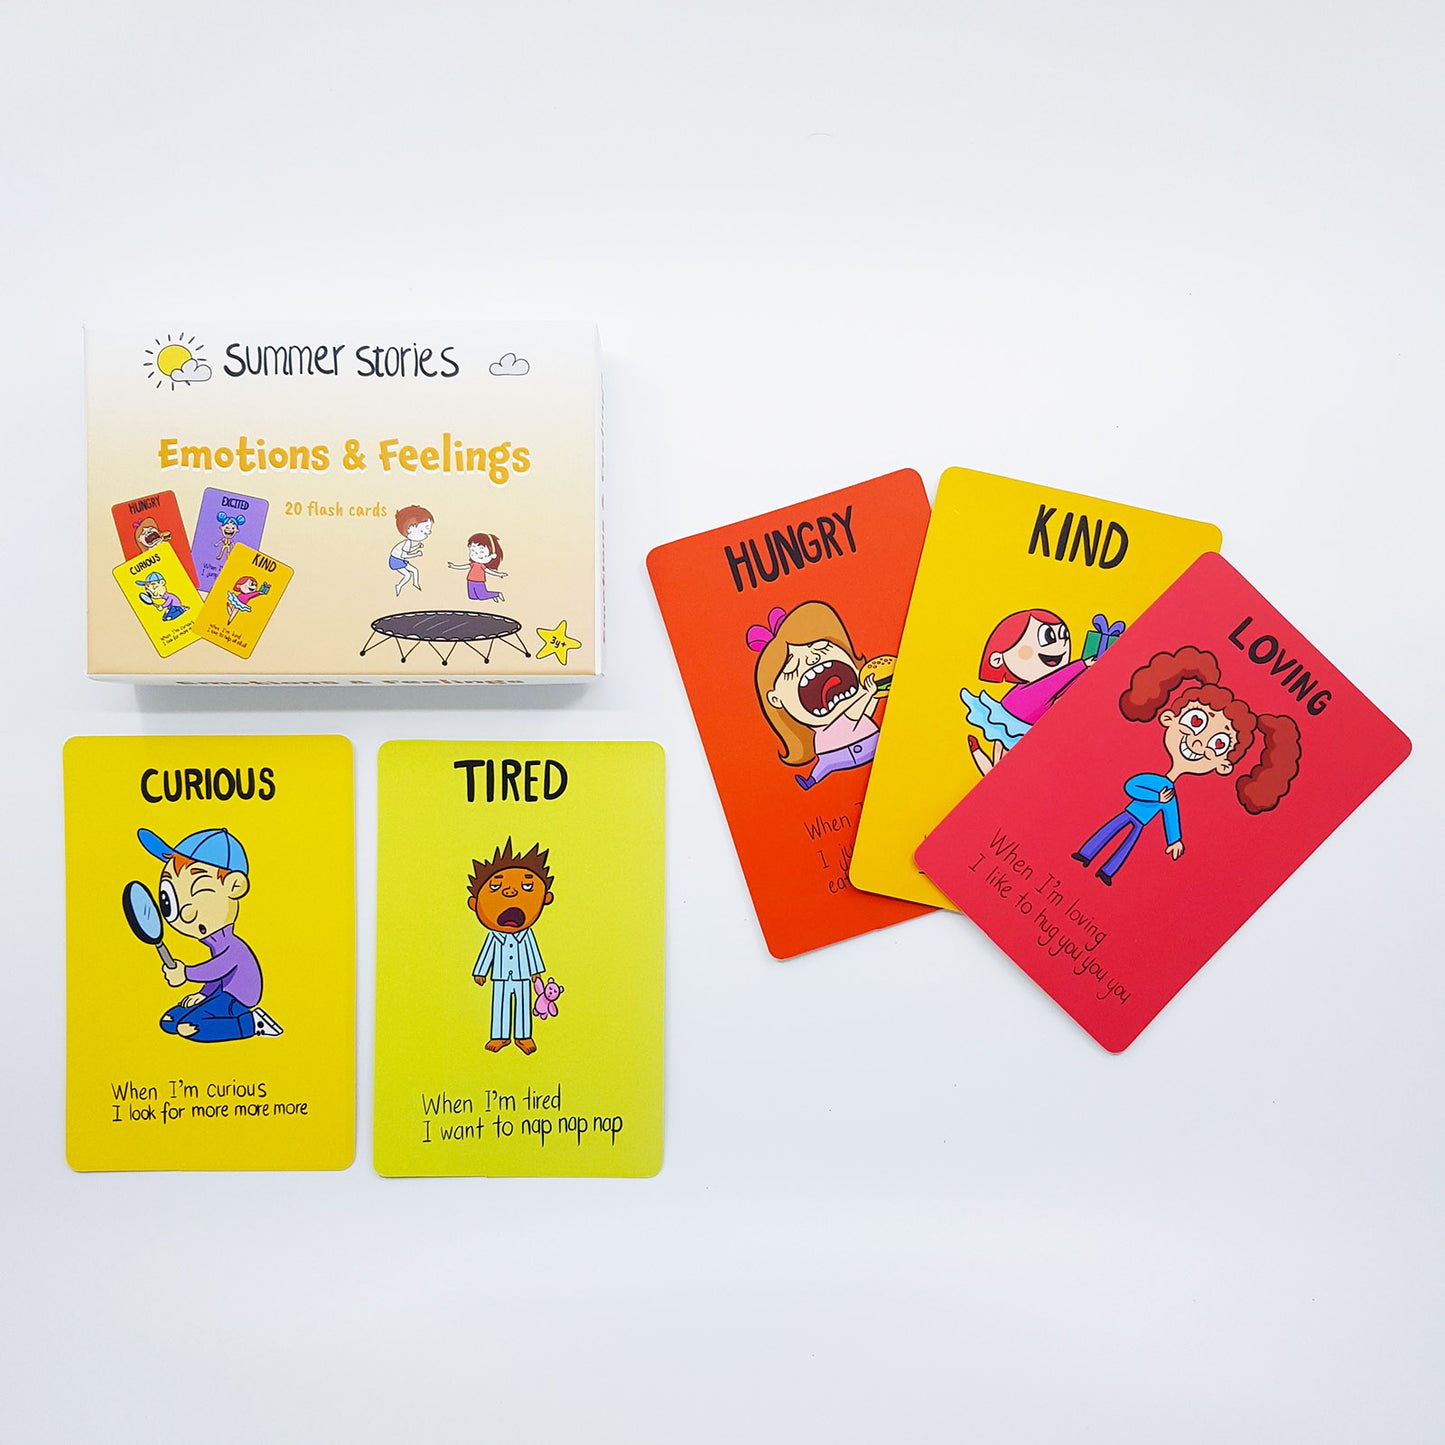 Explorer Bundle (4-8yrs) | 5 Boxes of 107 Cards | Underwater World, Outer Space, Countries, Emotions & Acts of Kindness